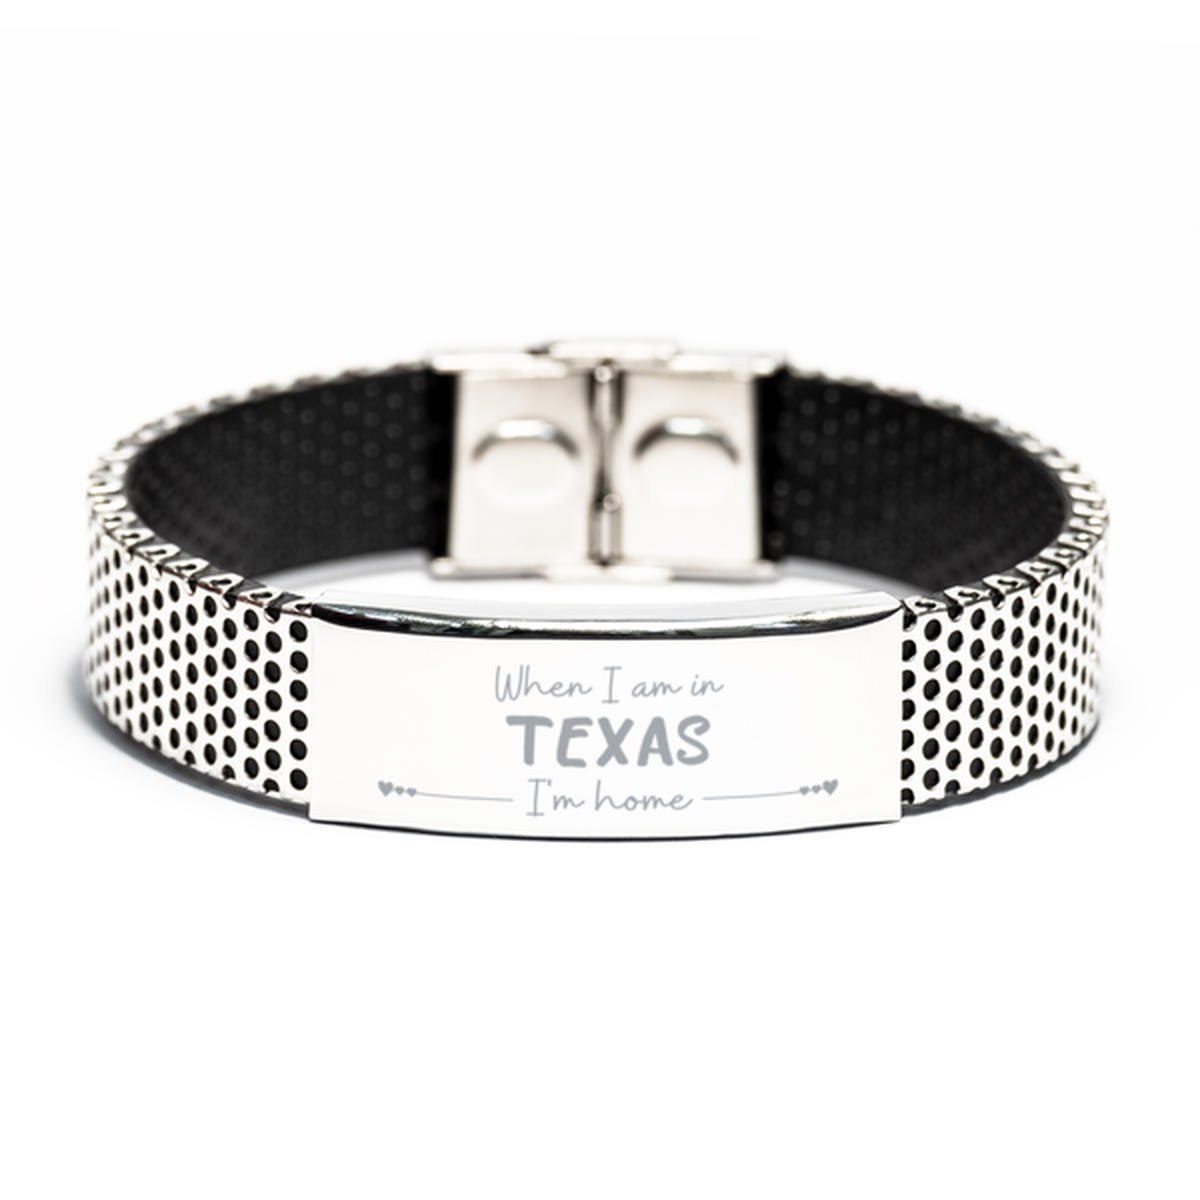 When I am in Texas I'm home Stainless Steel Bracelet, Cheap Gifts For Texas, State Texas Birthday Gifts for Friends Coworker